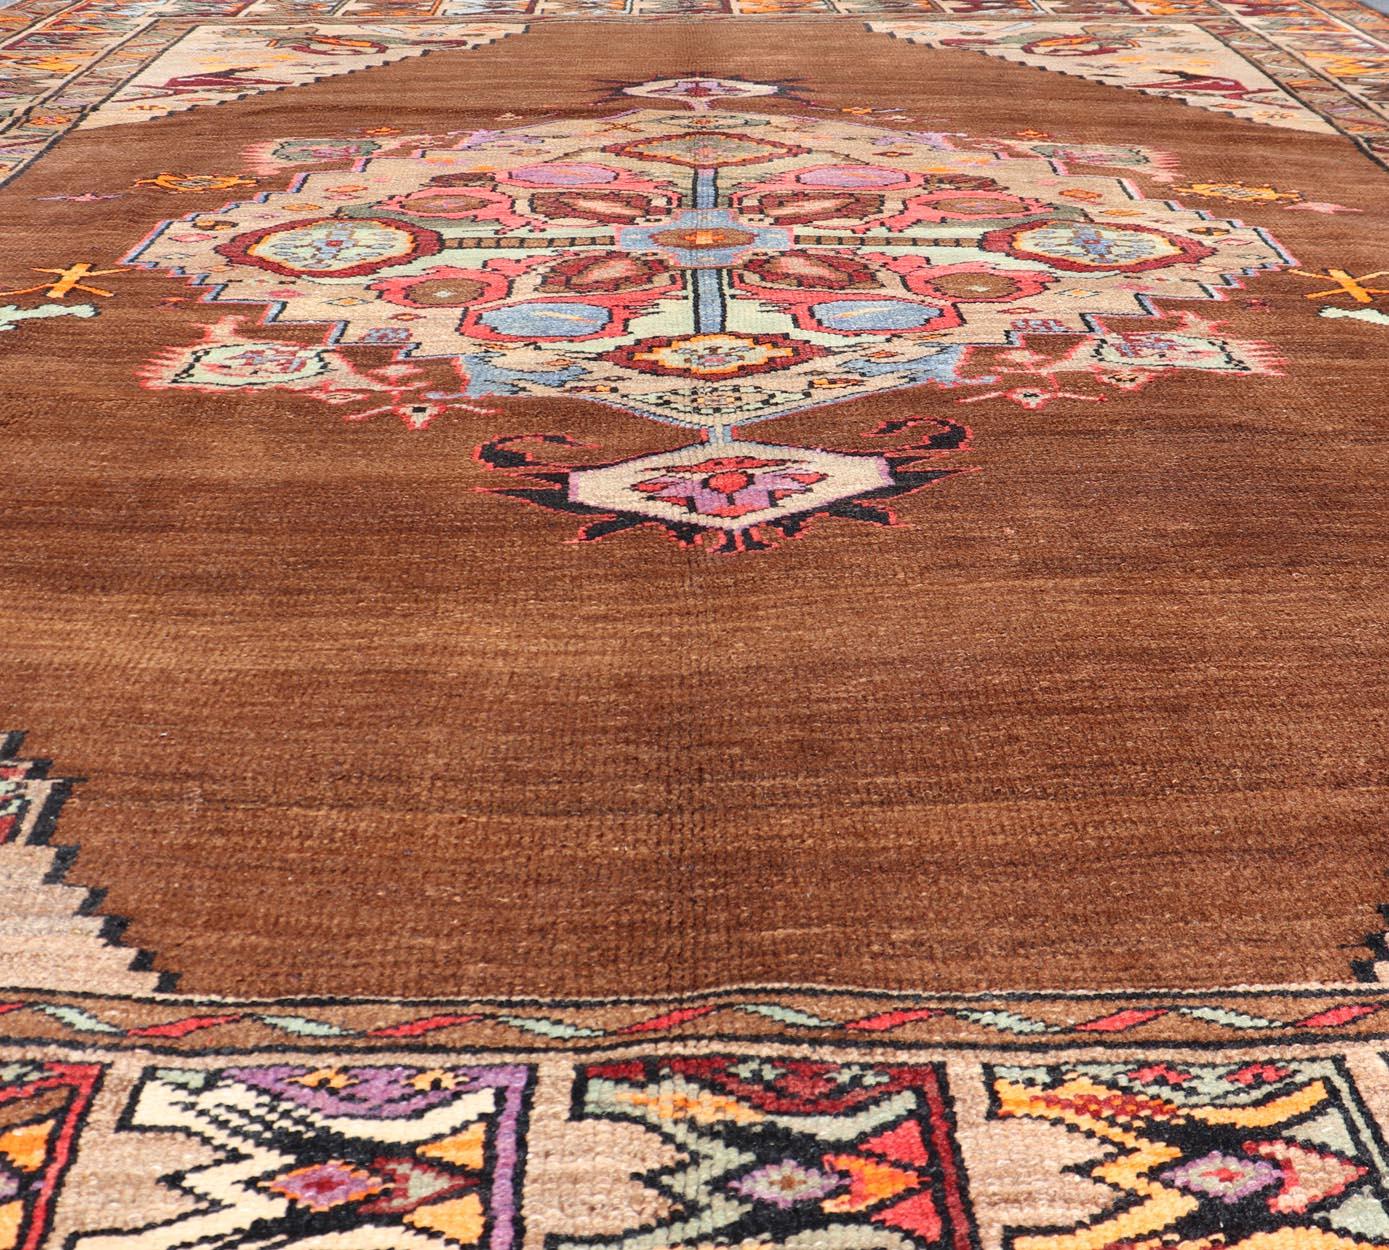 Vintage Turkish Kars Rug With Medallion On A Brown Field with Pops of Color. Keivan Woven Arts / rug / TU-MTU-3489, country of origin / type: Turkey / Oushak / Kars, circa 1940
Measures: 9'4 x 10'2.
This Turkish Kars rug has been handwoven in